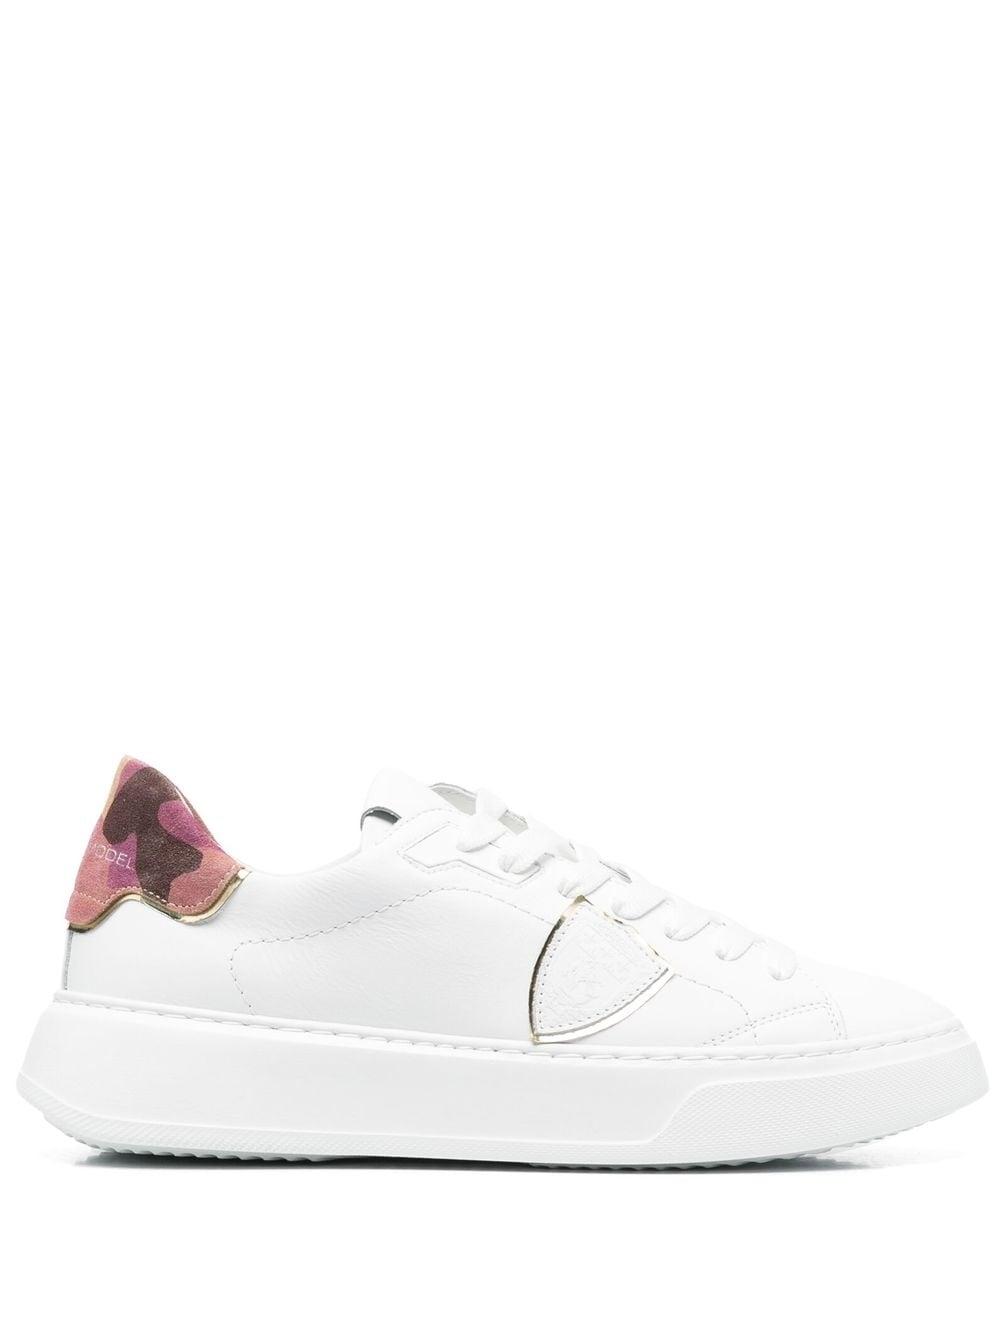 Philippe Model Paris Camo Low-top Sneakers in White | Lyst